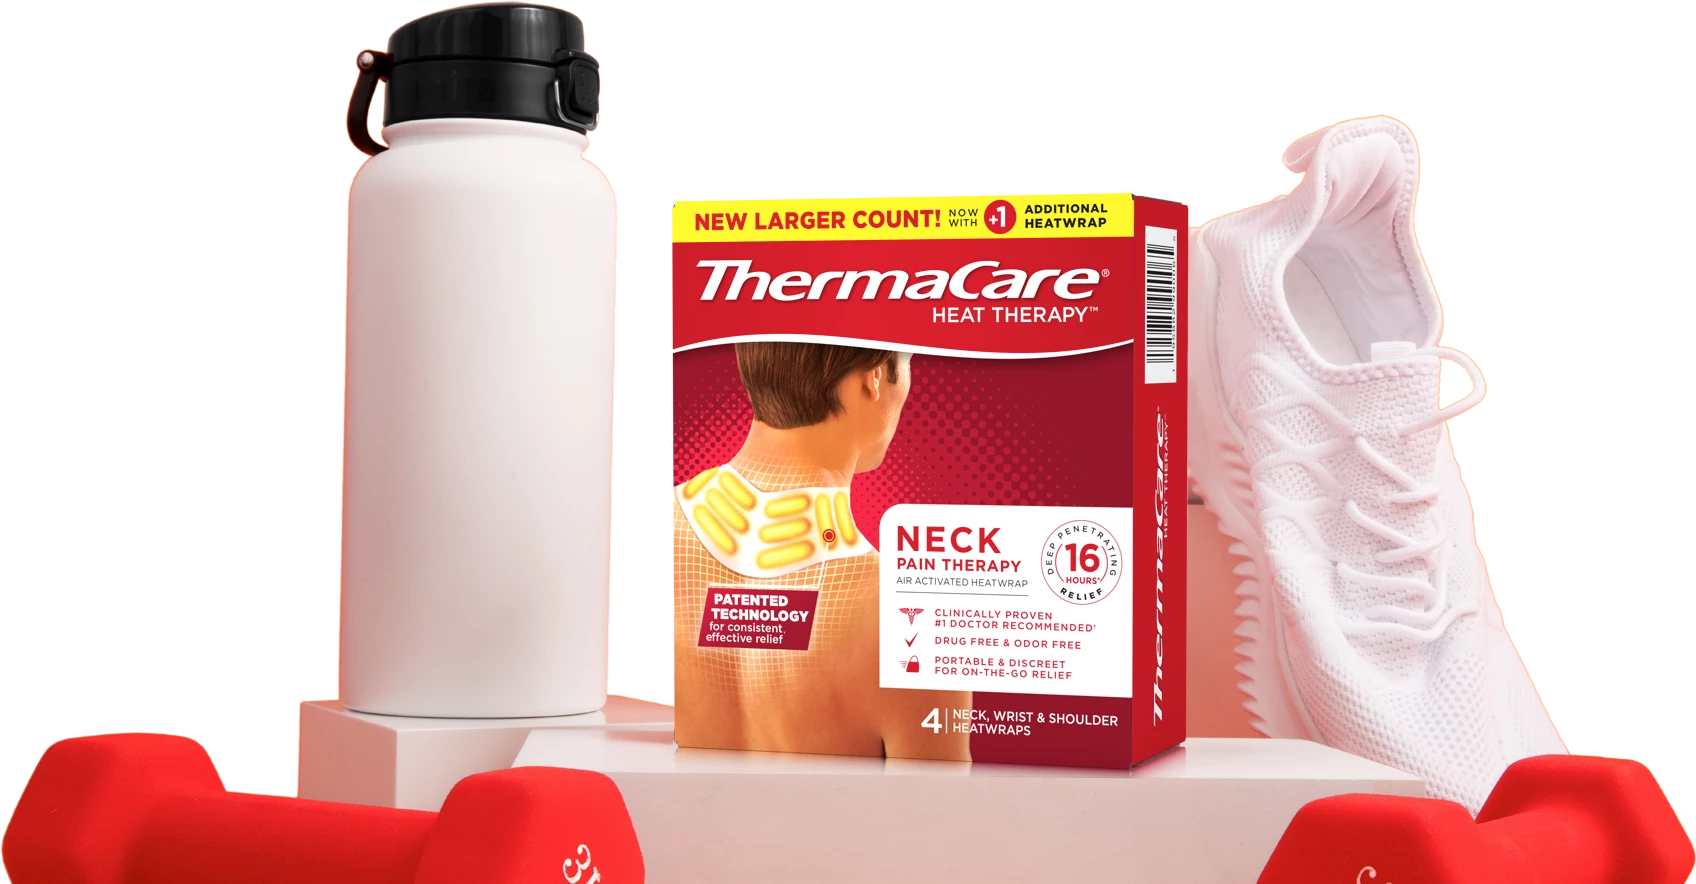 ThermaCare Neck Pain Therapy, Shoulder, and Wrist Pain Relief Patches, Heat  Wraps, 3 Ct 